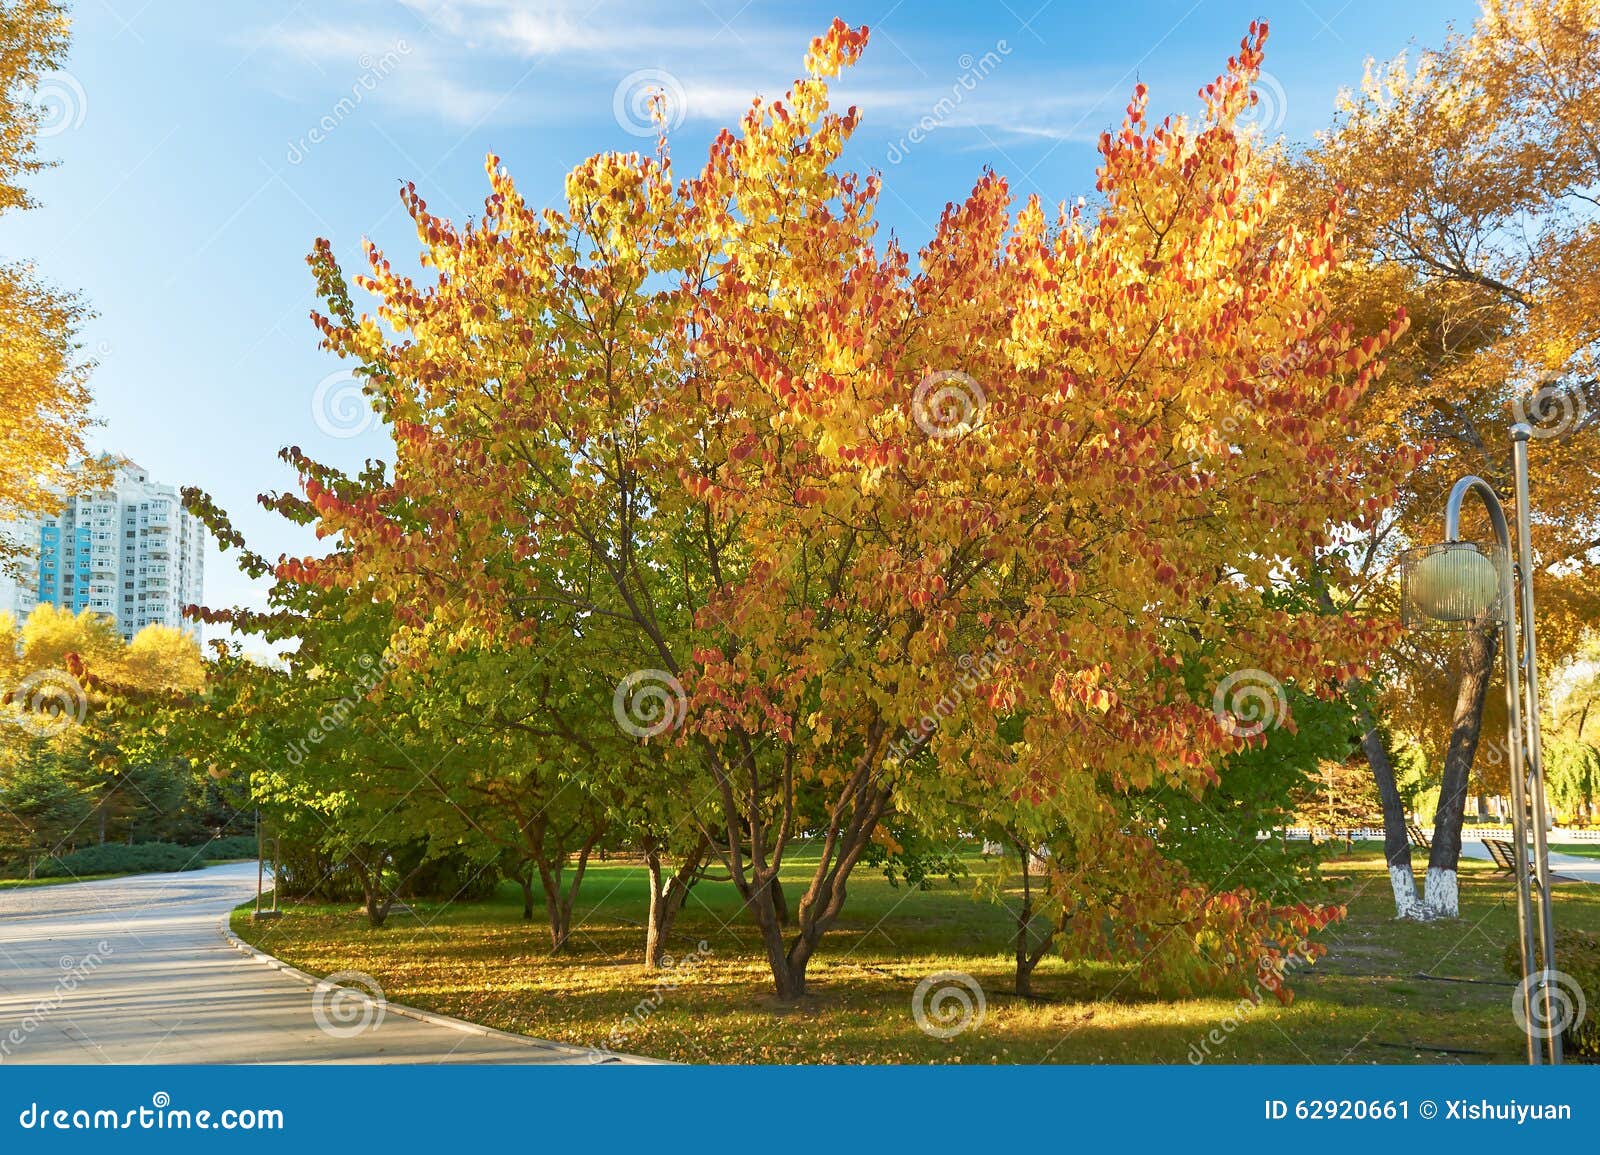 The Autumn Wild Apricot Trees Sunset Stock Image - Image of apricot ...